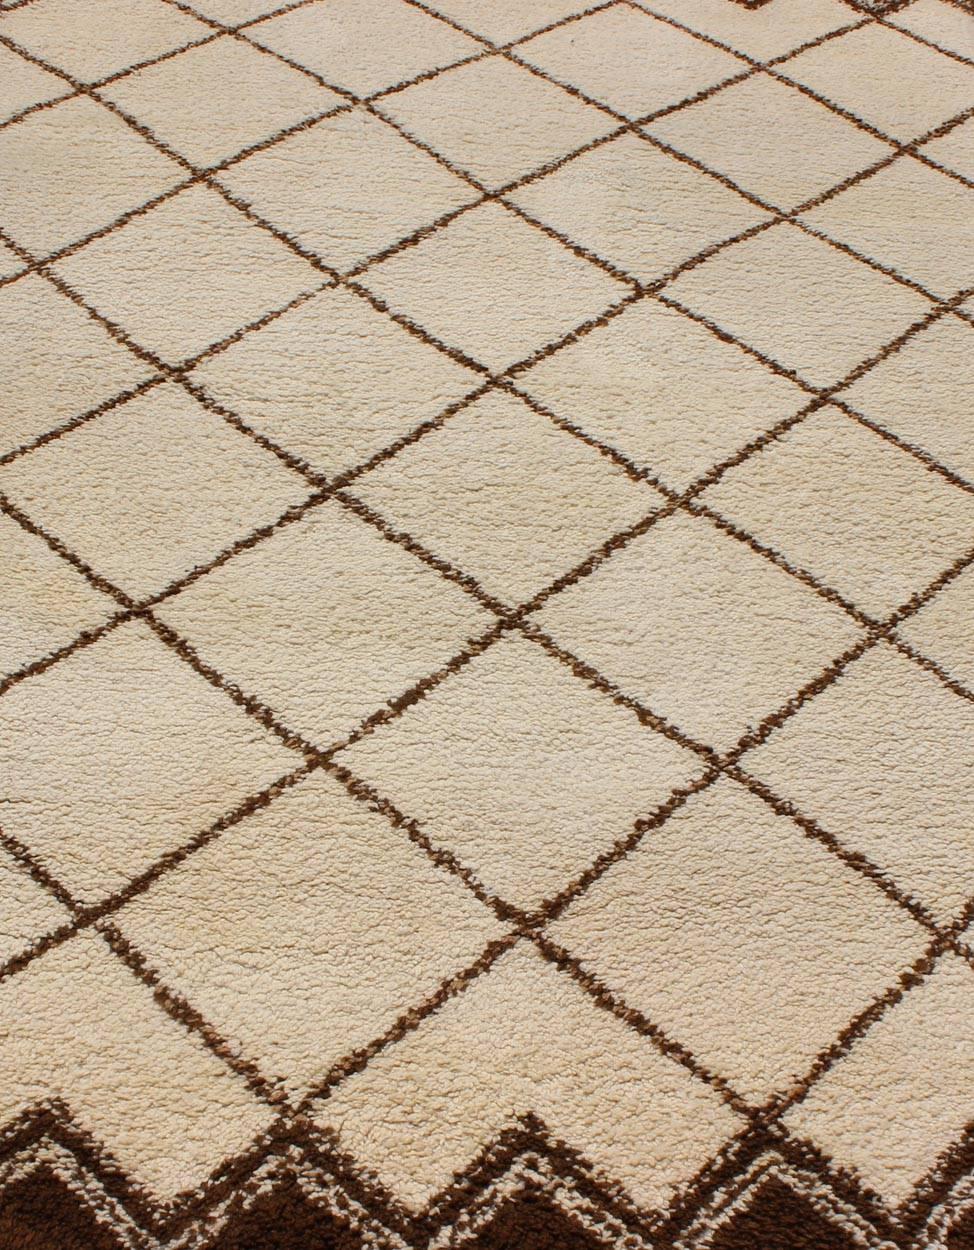 Tribal Vintage Moroccan Rug in Modern Minimalist Design with Ivory and Brown 